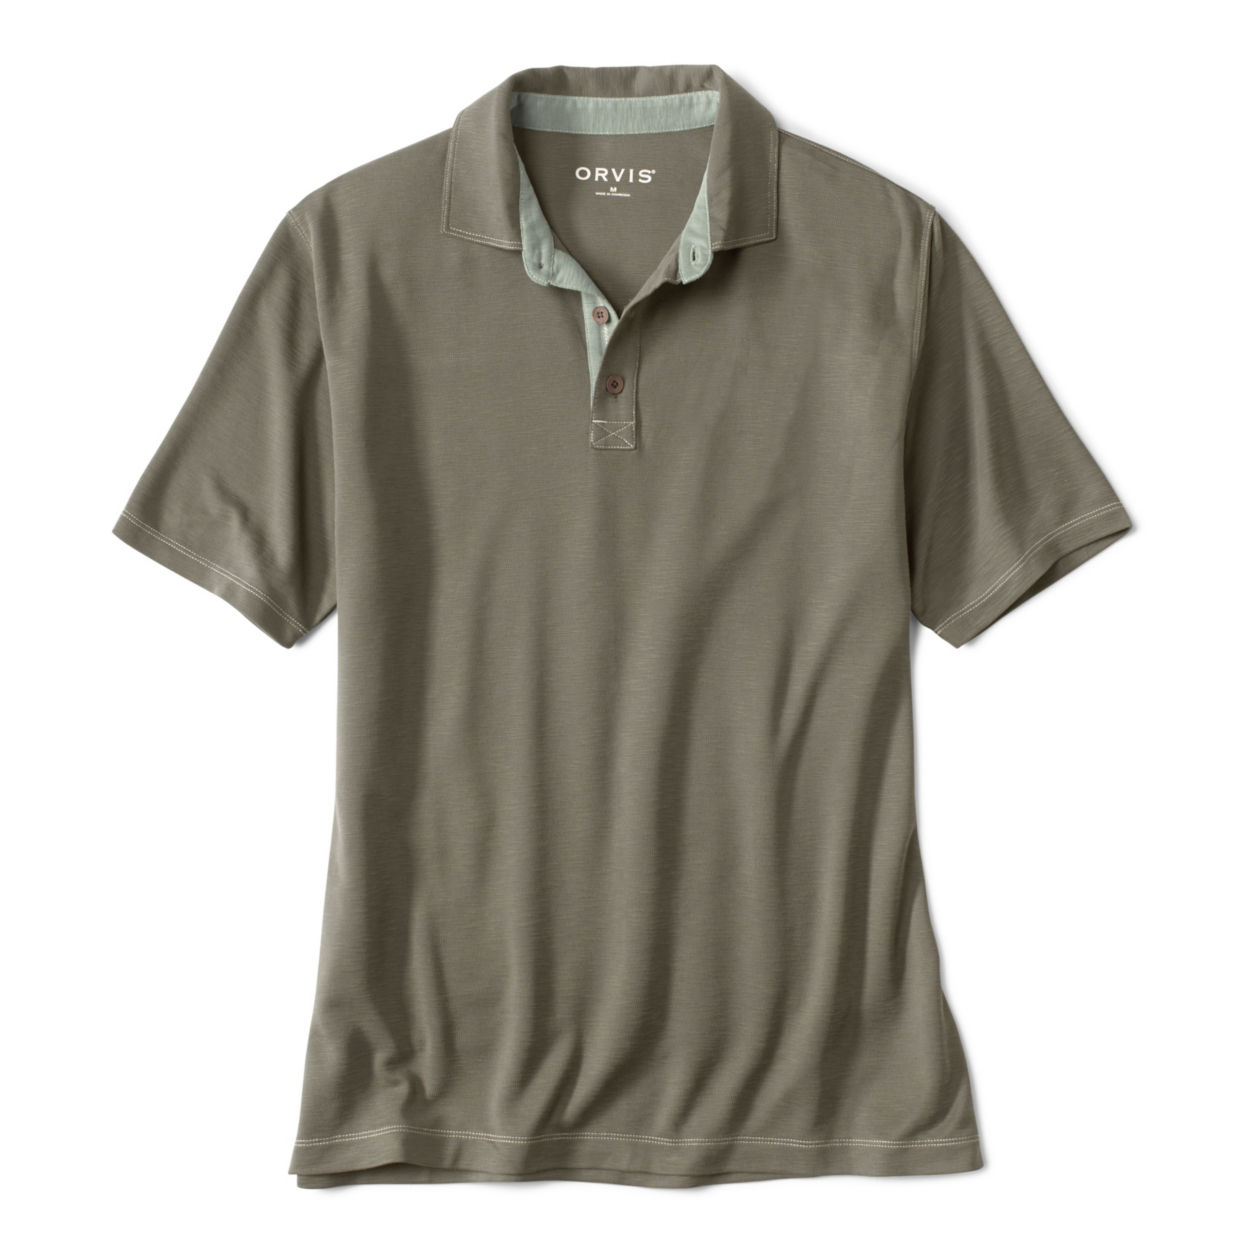 Men's Three Forks Eco-Friendly Polo Shirt Tarragon Size Medium Polyester/Modal/Recycled Materials Orvis